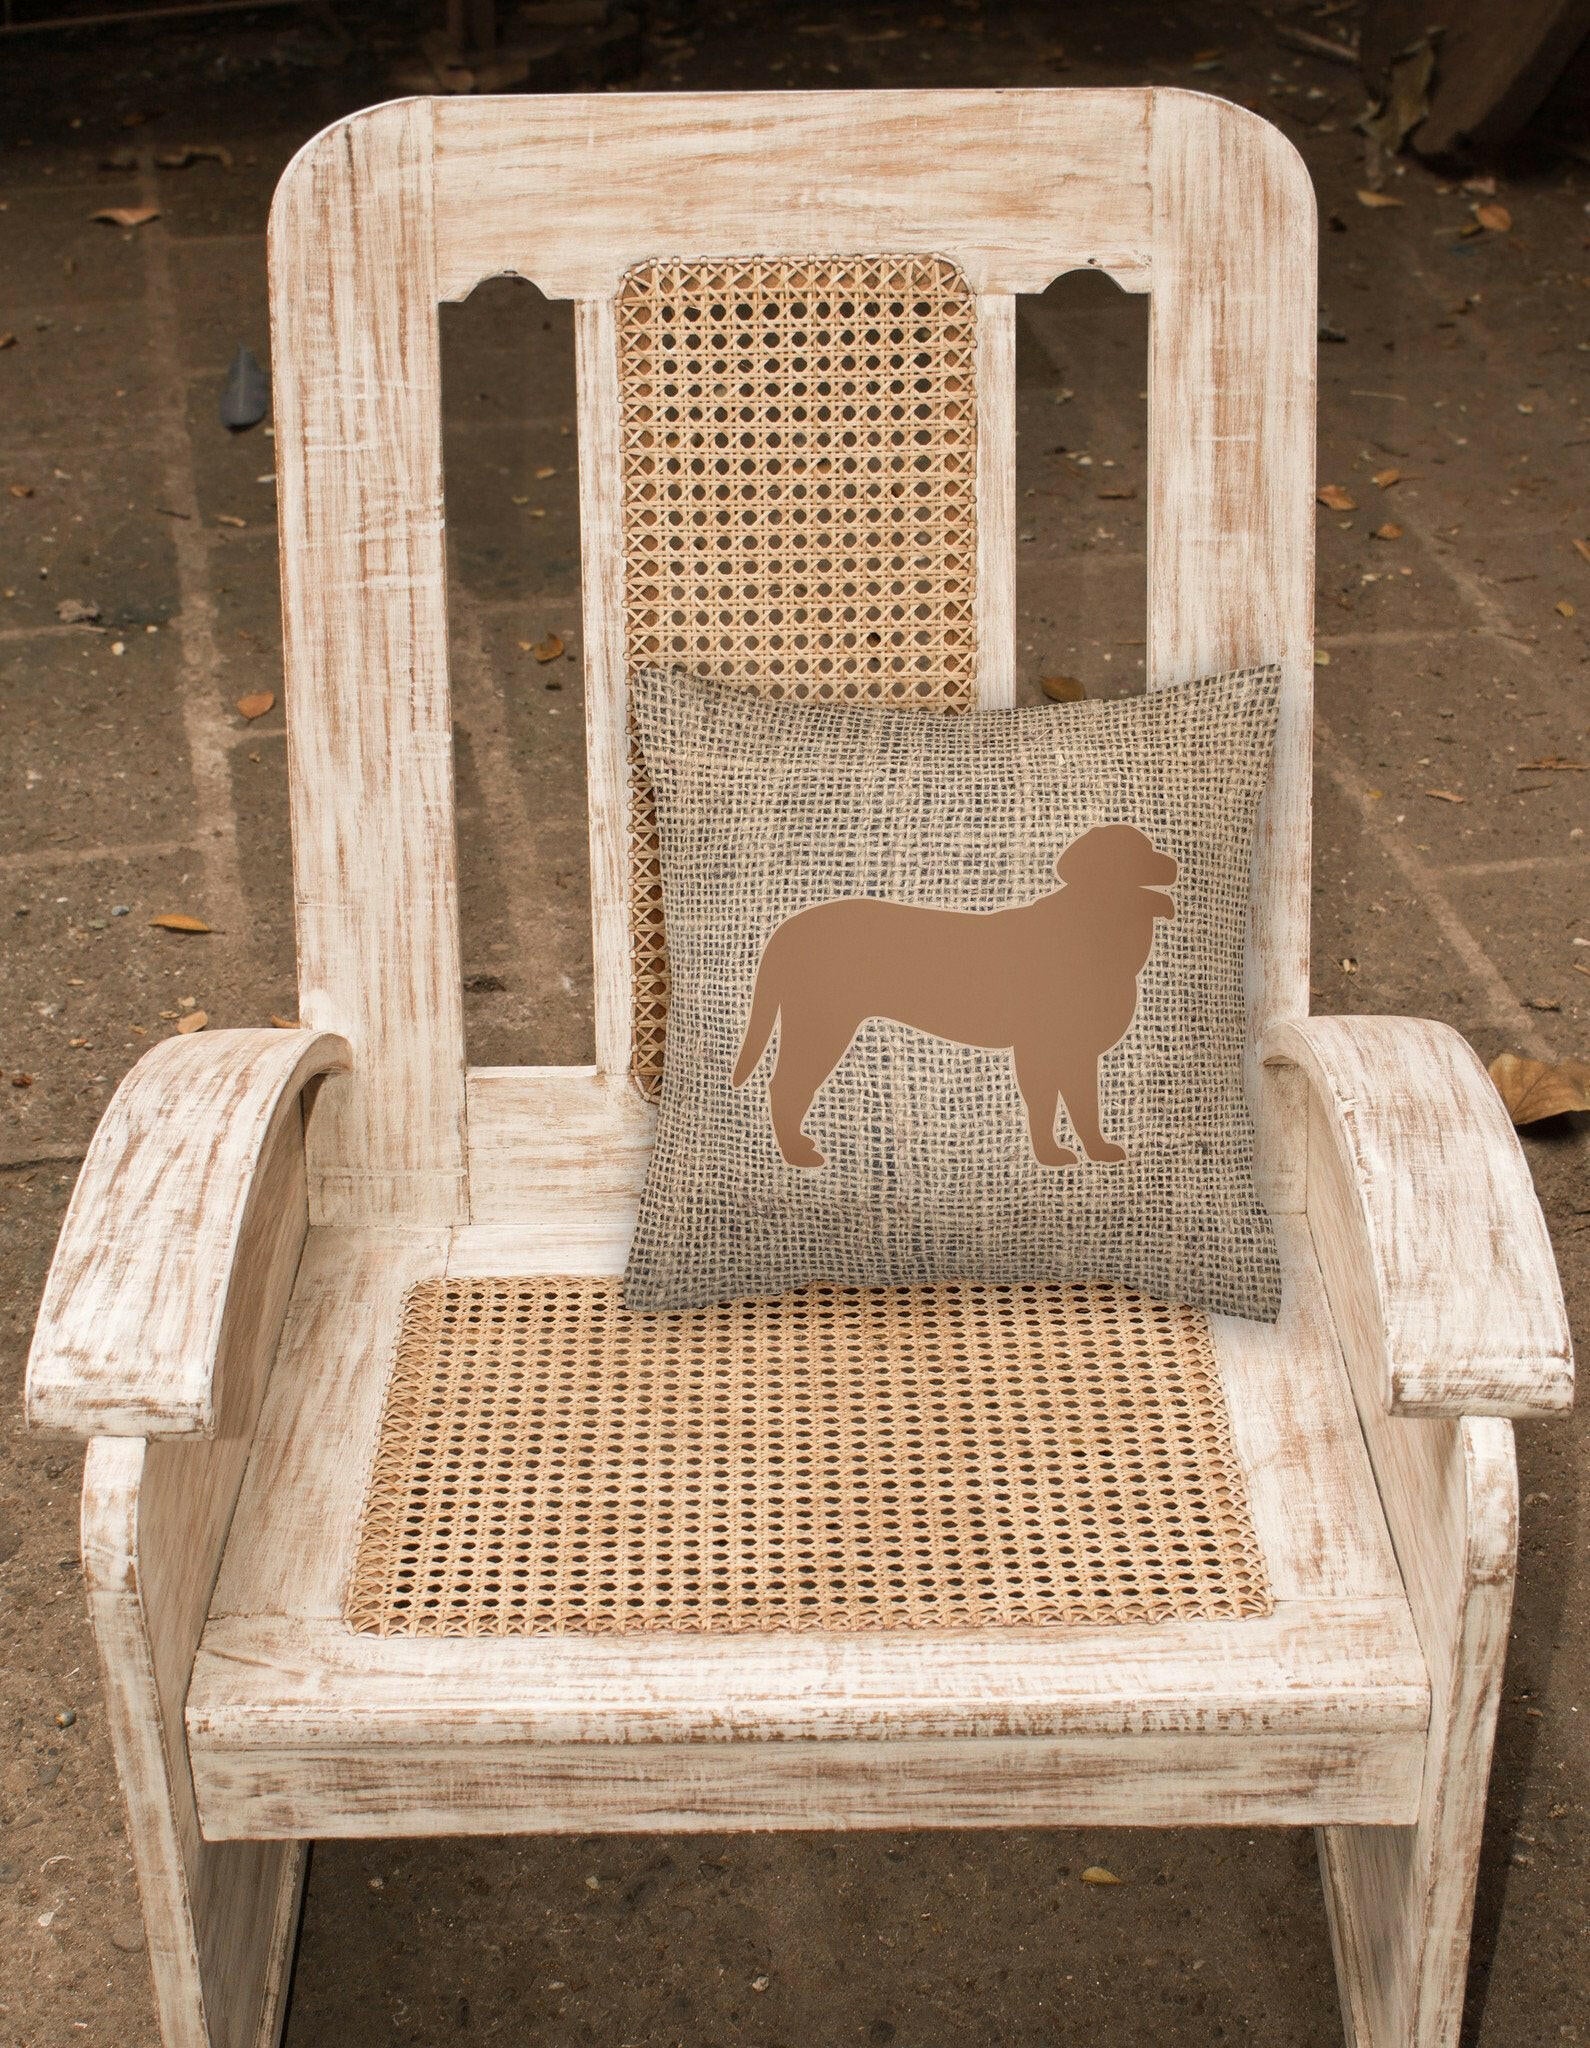 Curly Coated Retriever Burlap and Brown   Canvas Fabric Decorative Pillow - the-store.com